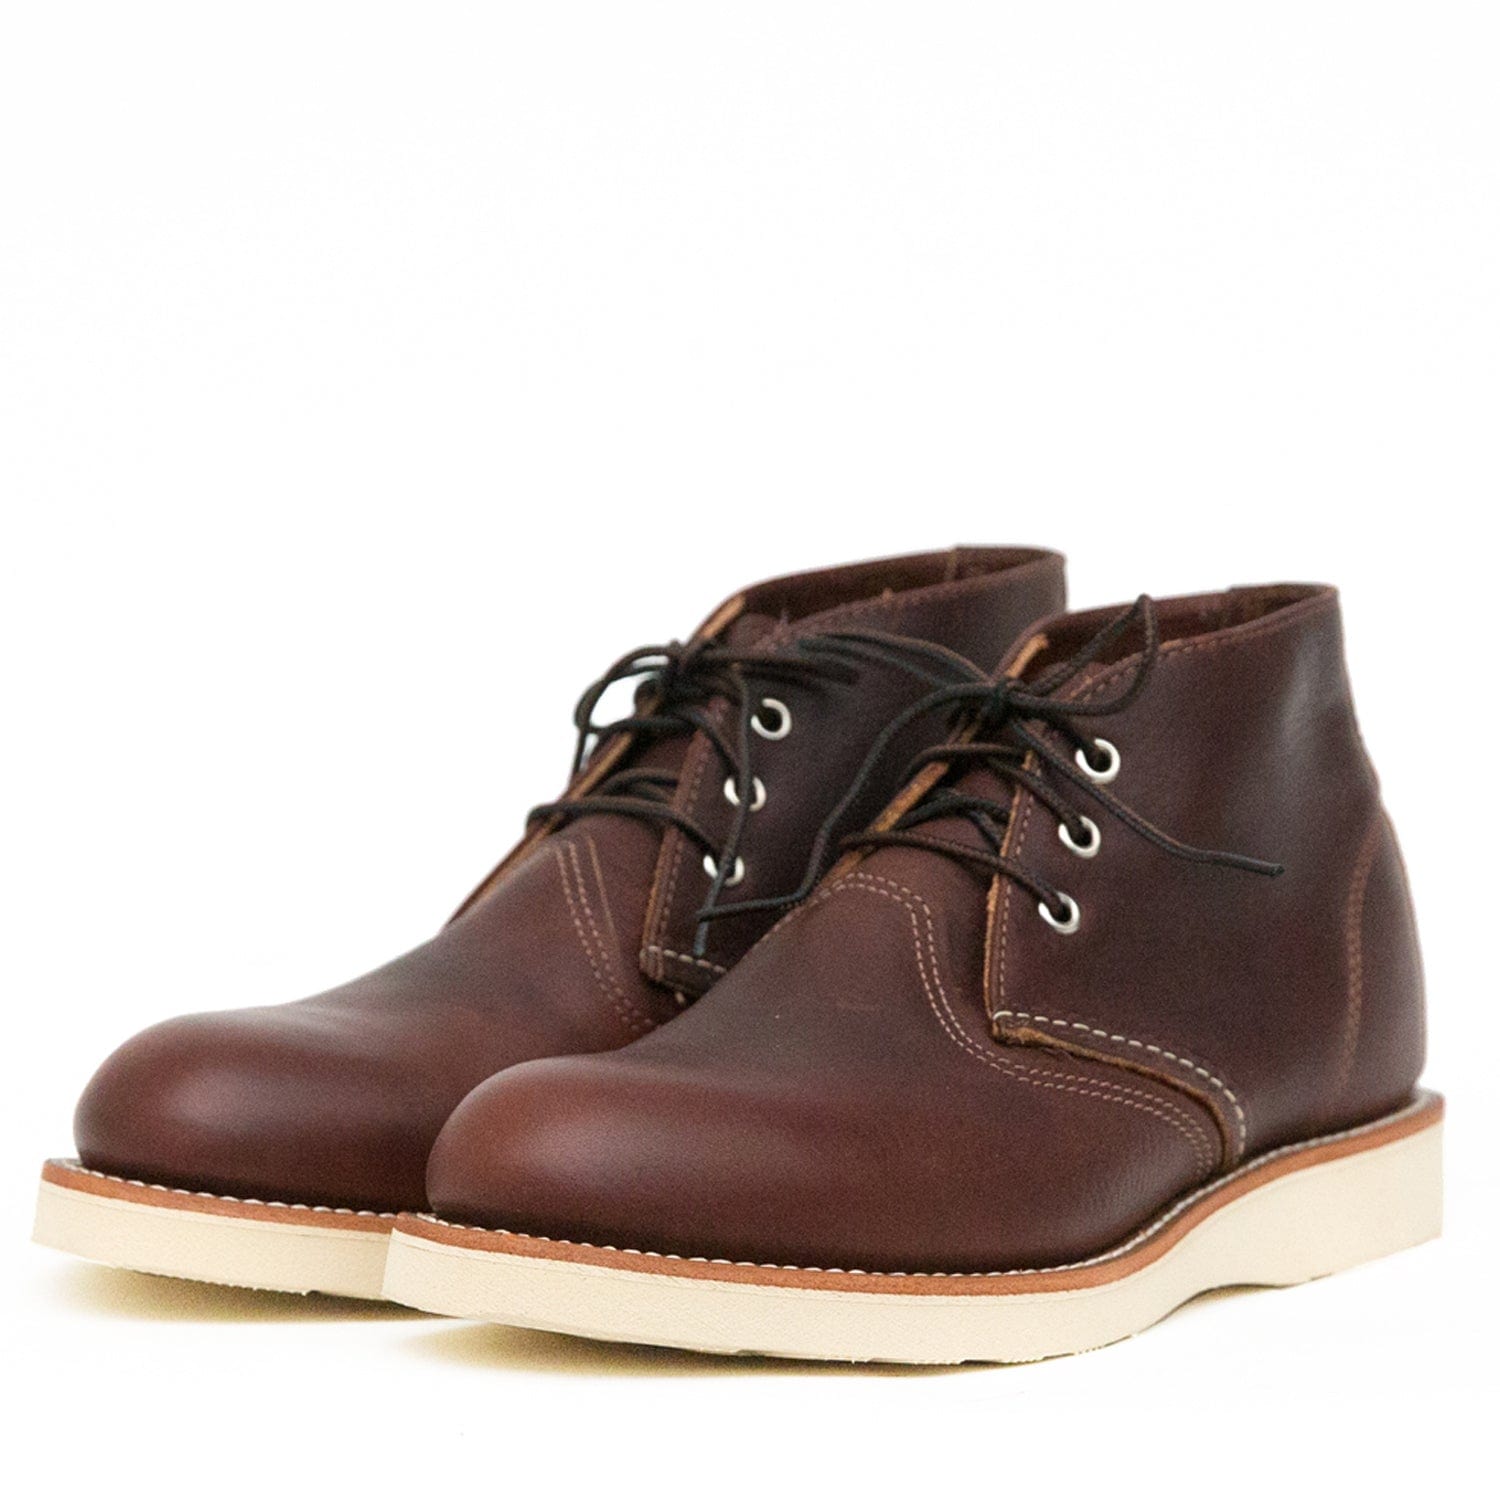 RED WING 3141 CLASSIC CHUKKA BOOTS